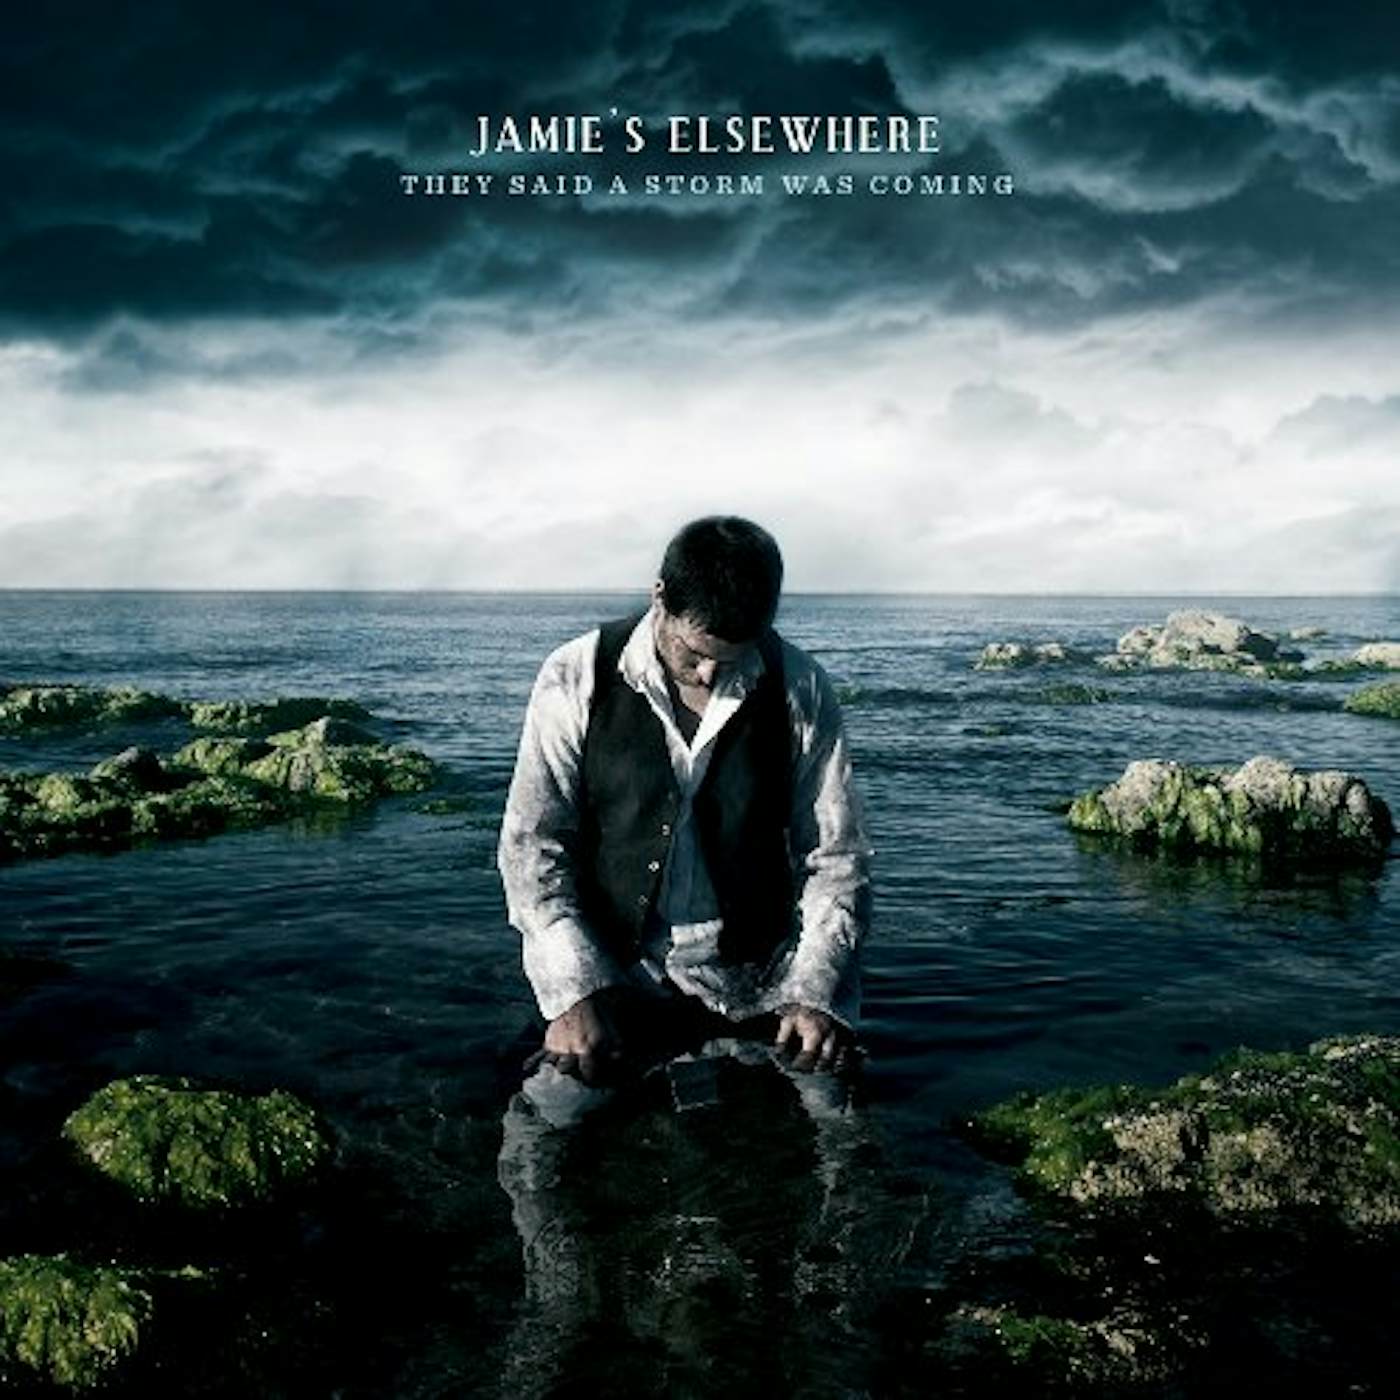 Jamie's Elsewhere THEY SAID A STORM WAS COMING CD